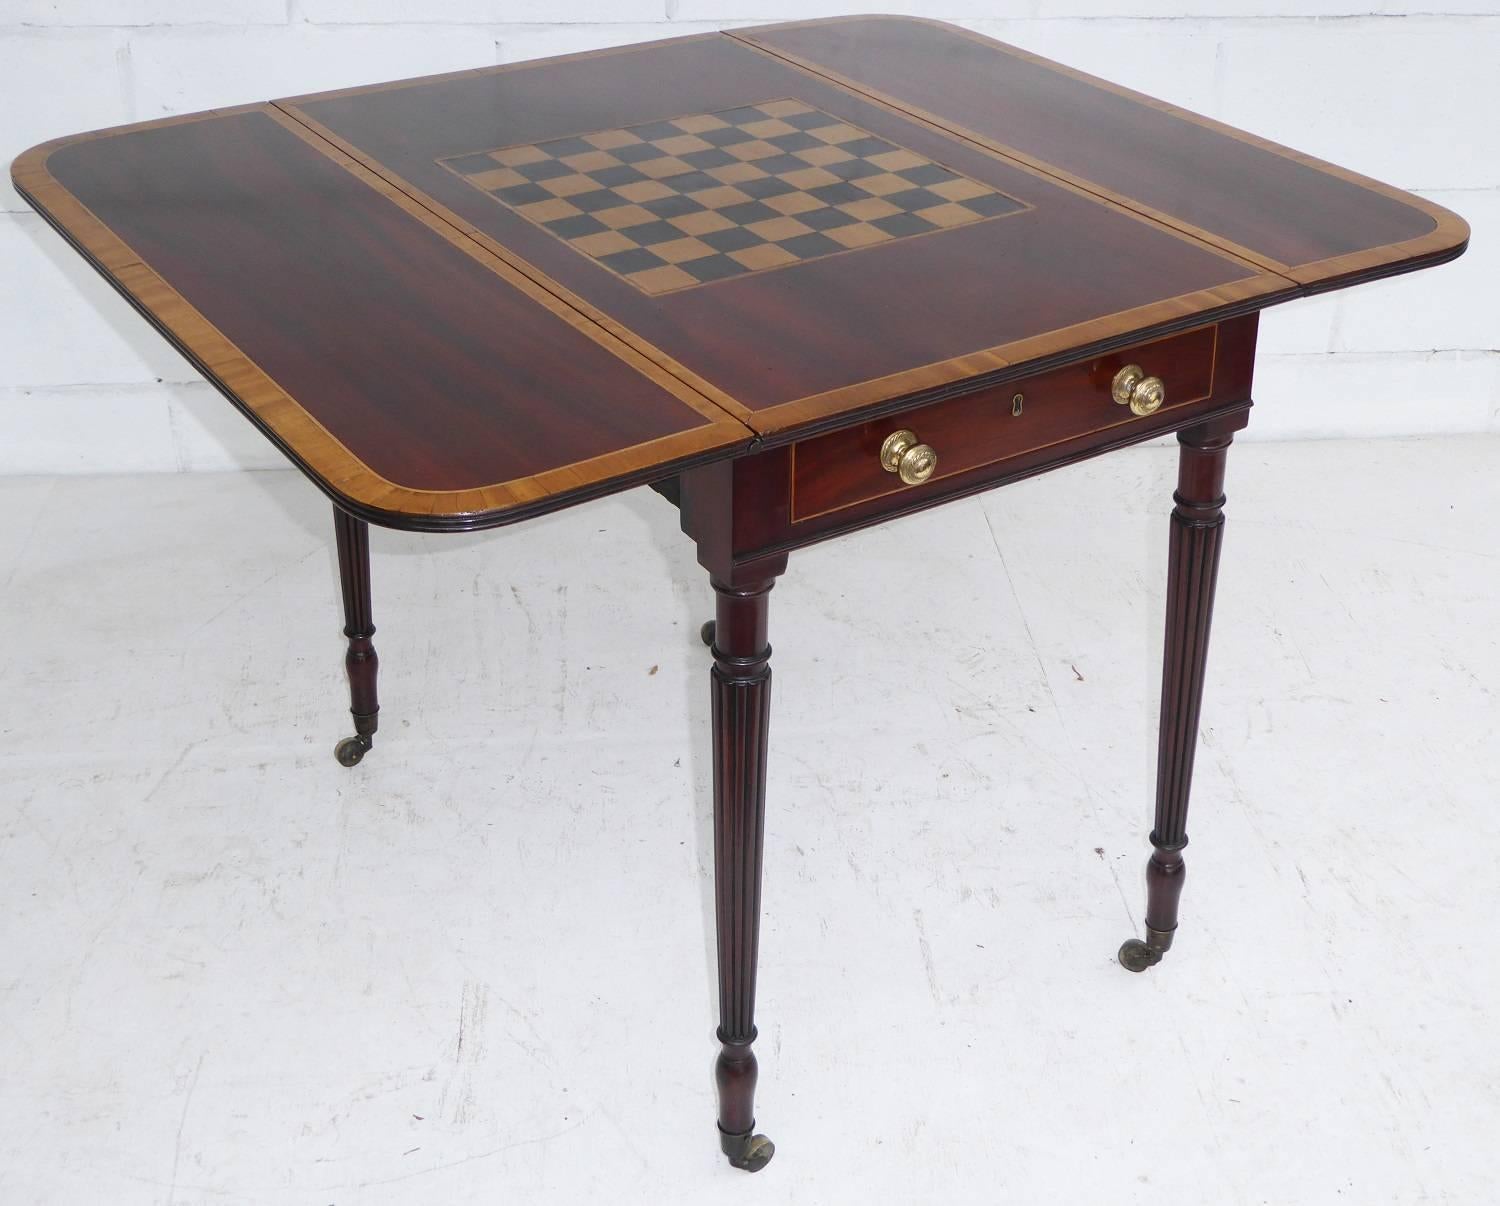 For sale is a good quality William IV mahogany and satinwood pembroke table with a games top. The centre of the table has a chess board, surrounded by satinwood inlay and satinwood banding to the edge. On either side of the table is a lift up flap,